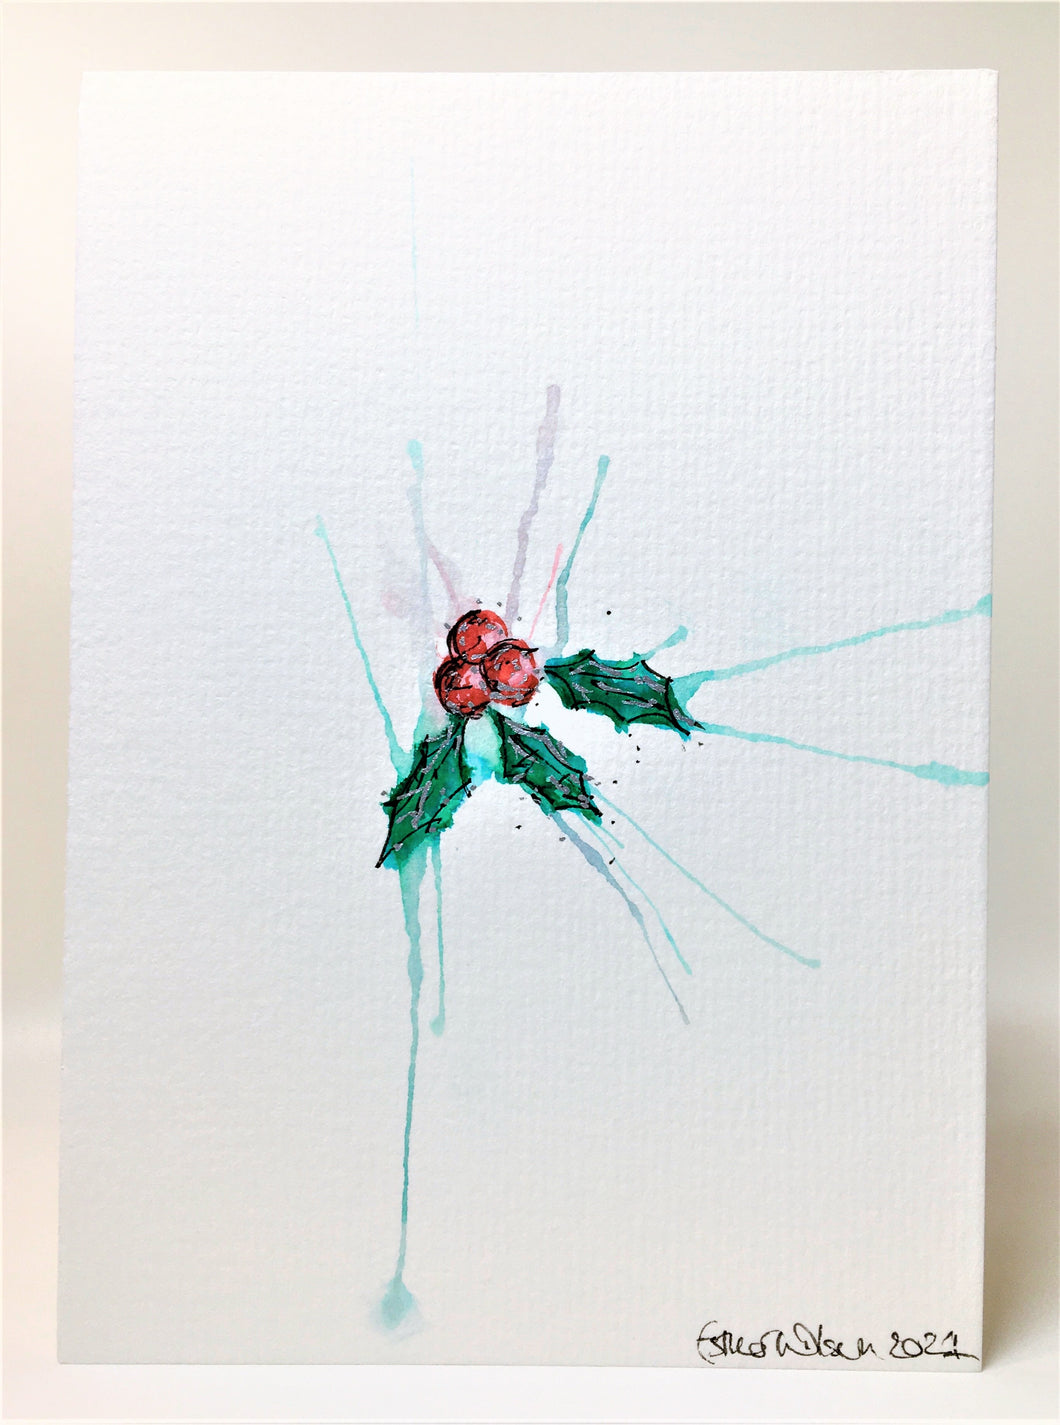 Abstract Splatter Holly Design #2 - Hand Painted Christmas Card